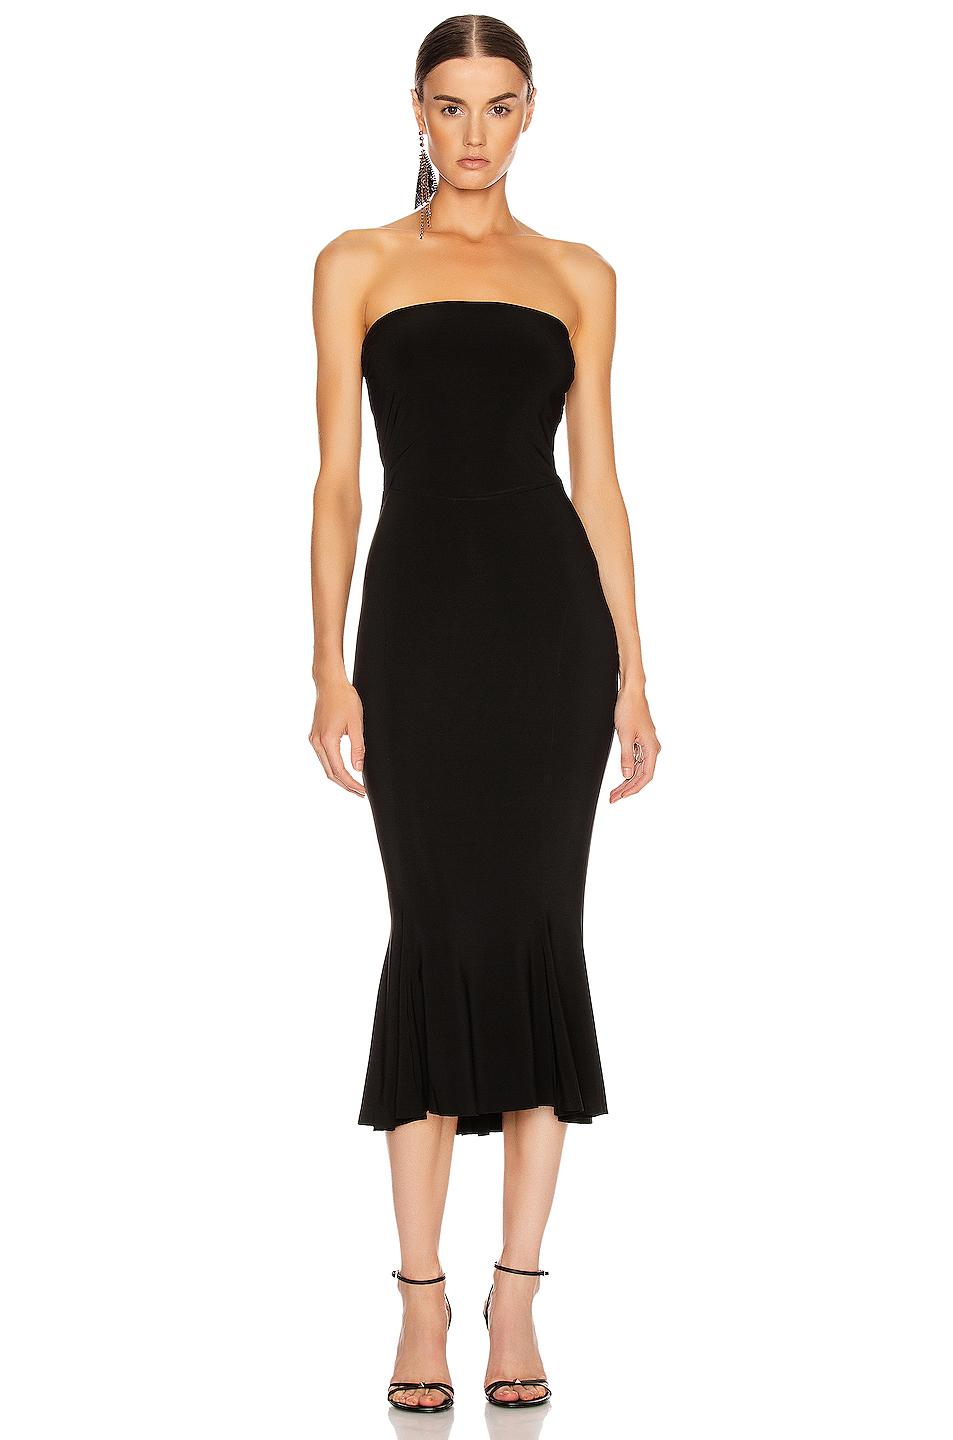 Norma Kamali Synthetic Strapless Fishtail Dress To Midcalf in Black - Lyst